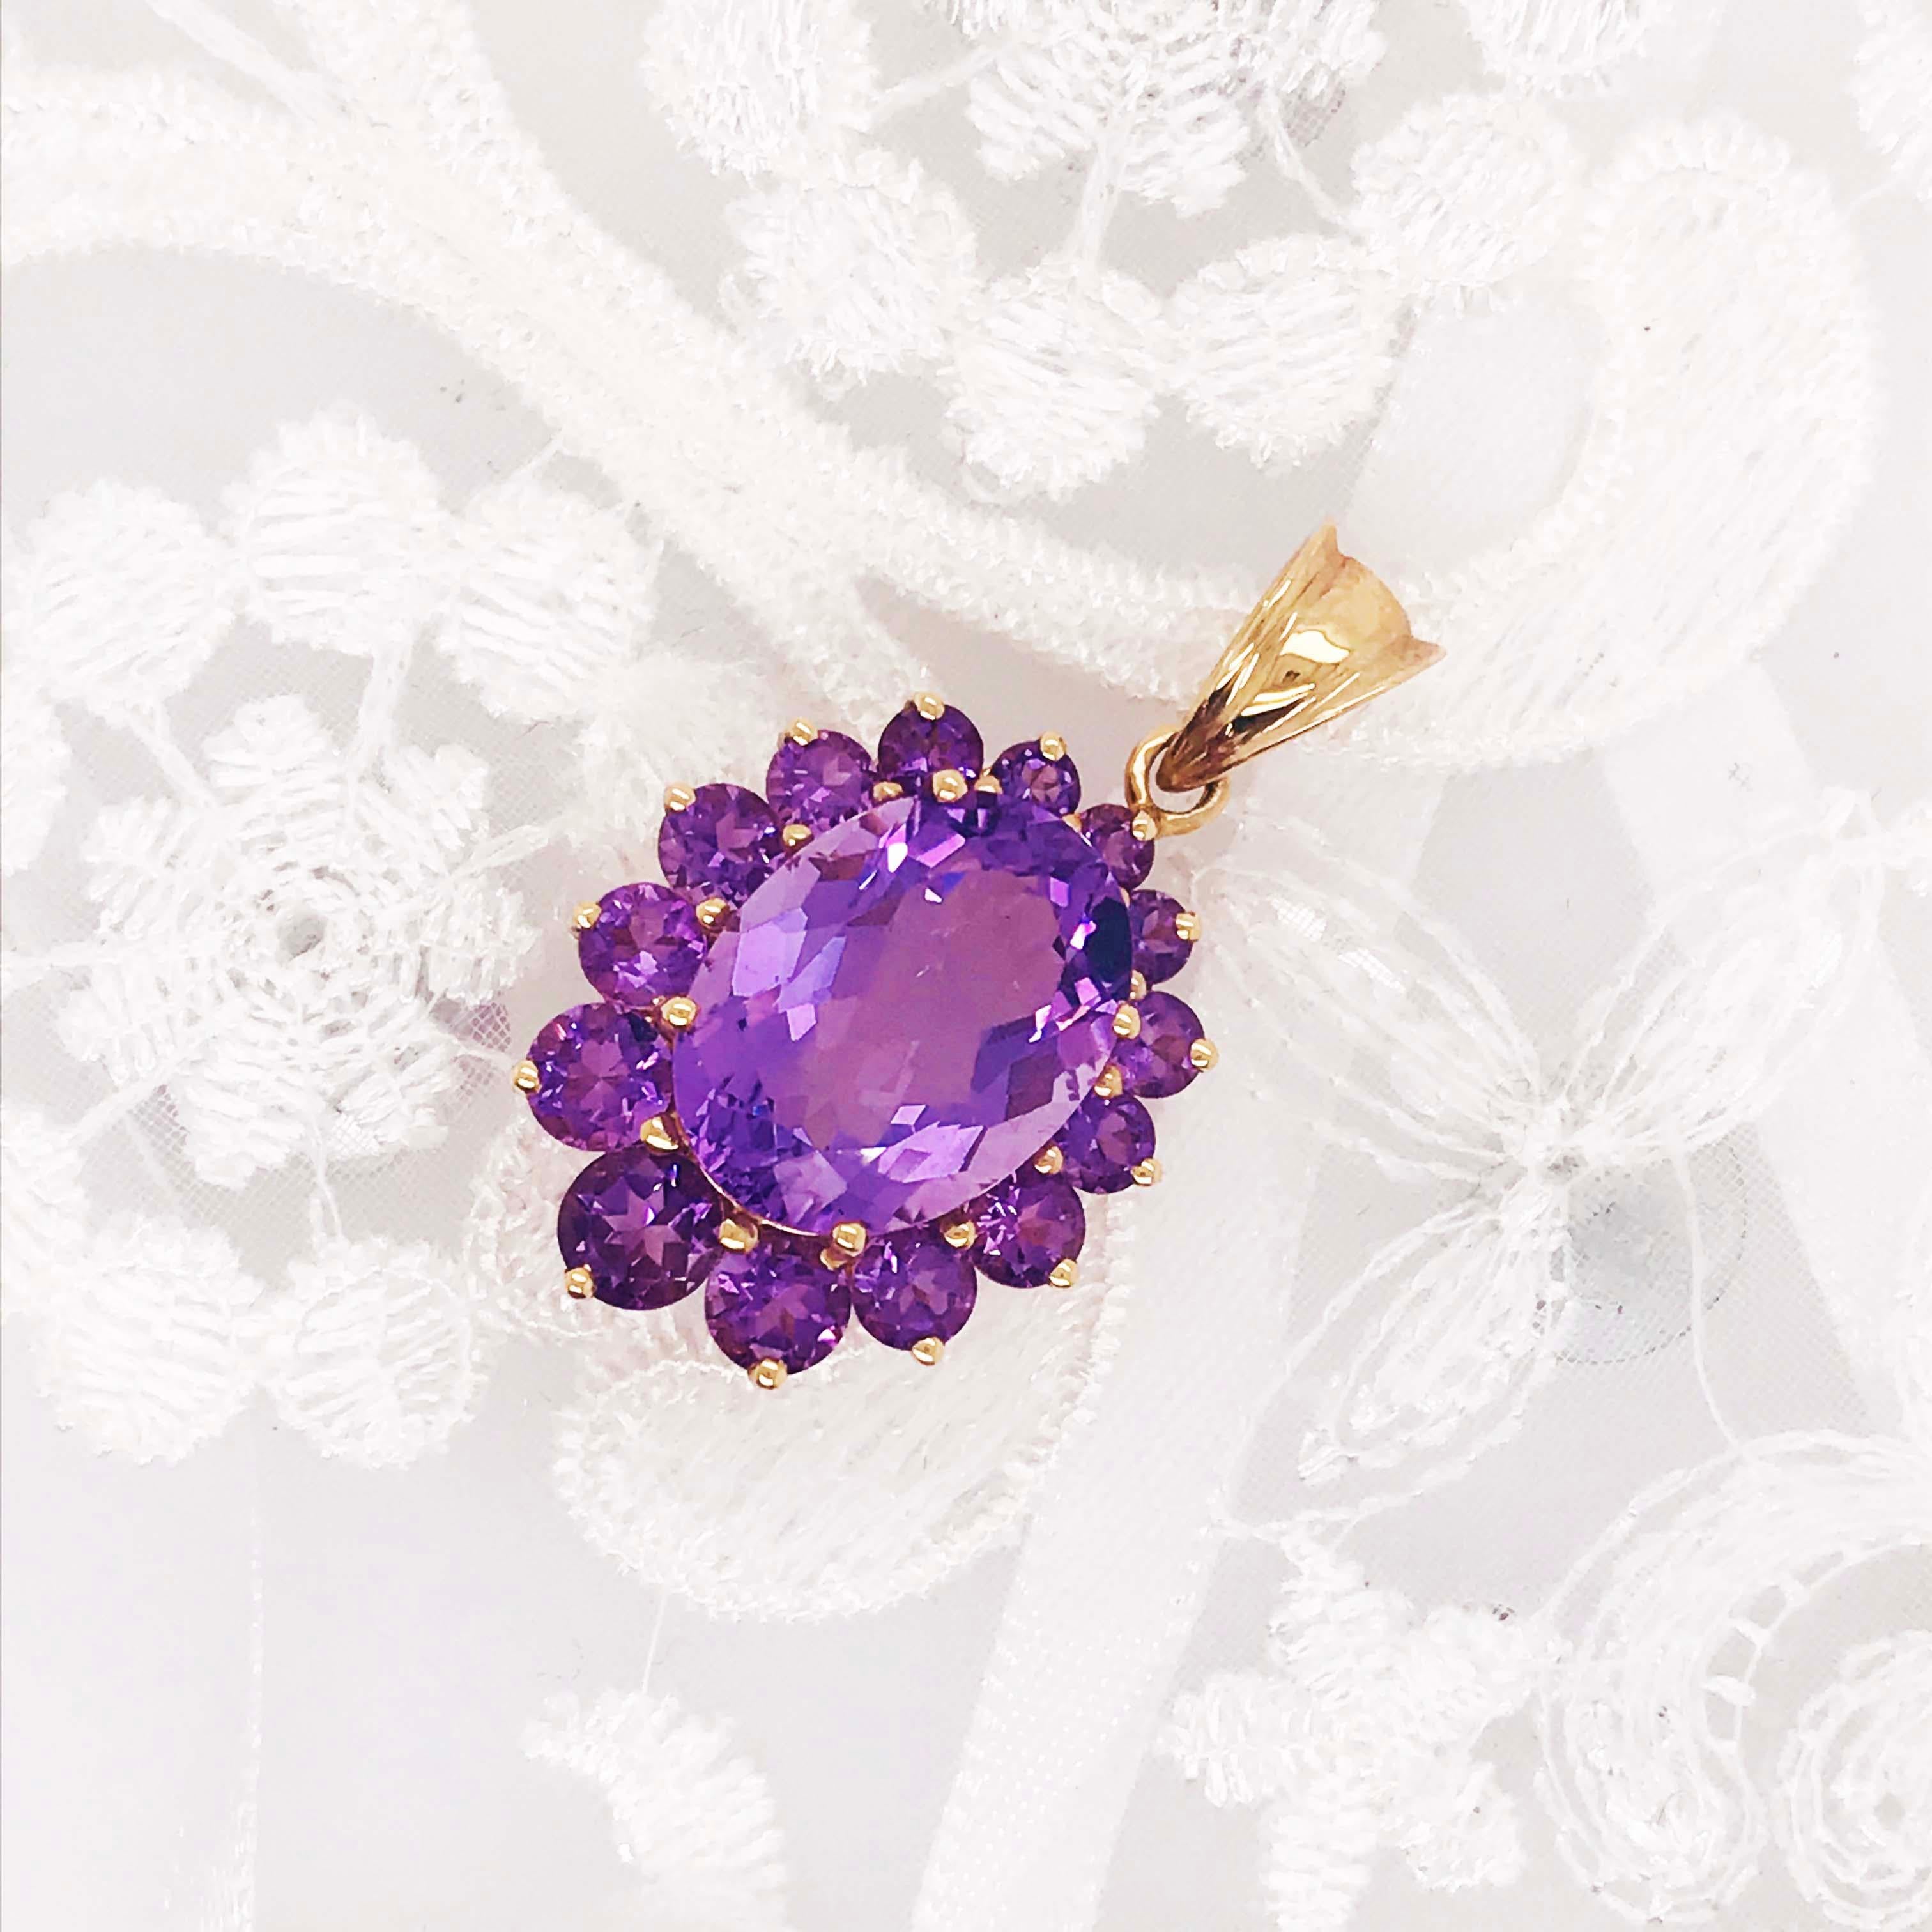 Purple Amethyst have been a symbol of women for centuries! In the 1900's women would wear an accent of purple as a sign or sneaky way to say they support women's rights and deserve more! Amethyst is a gemstone that was made for women! It is their